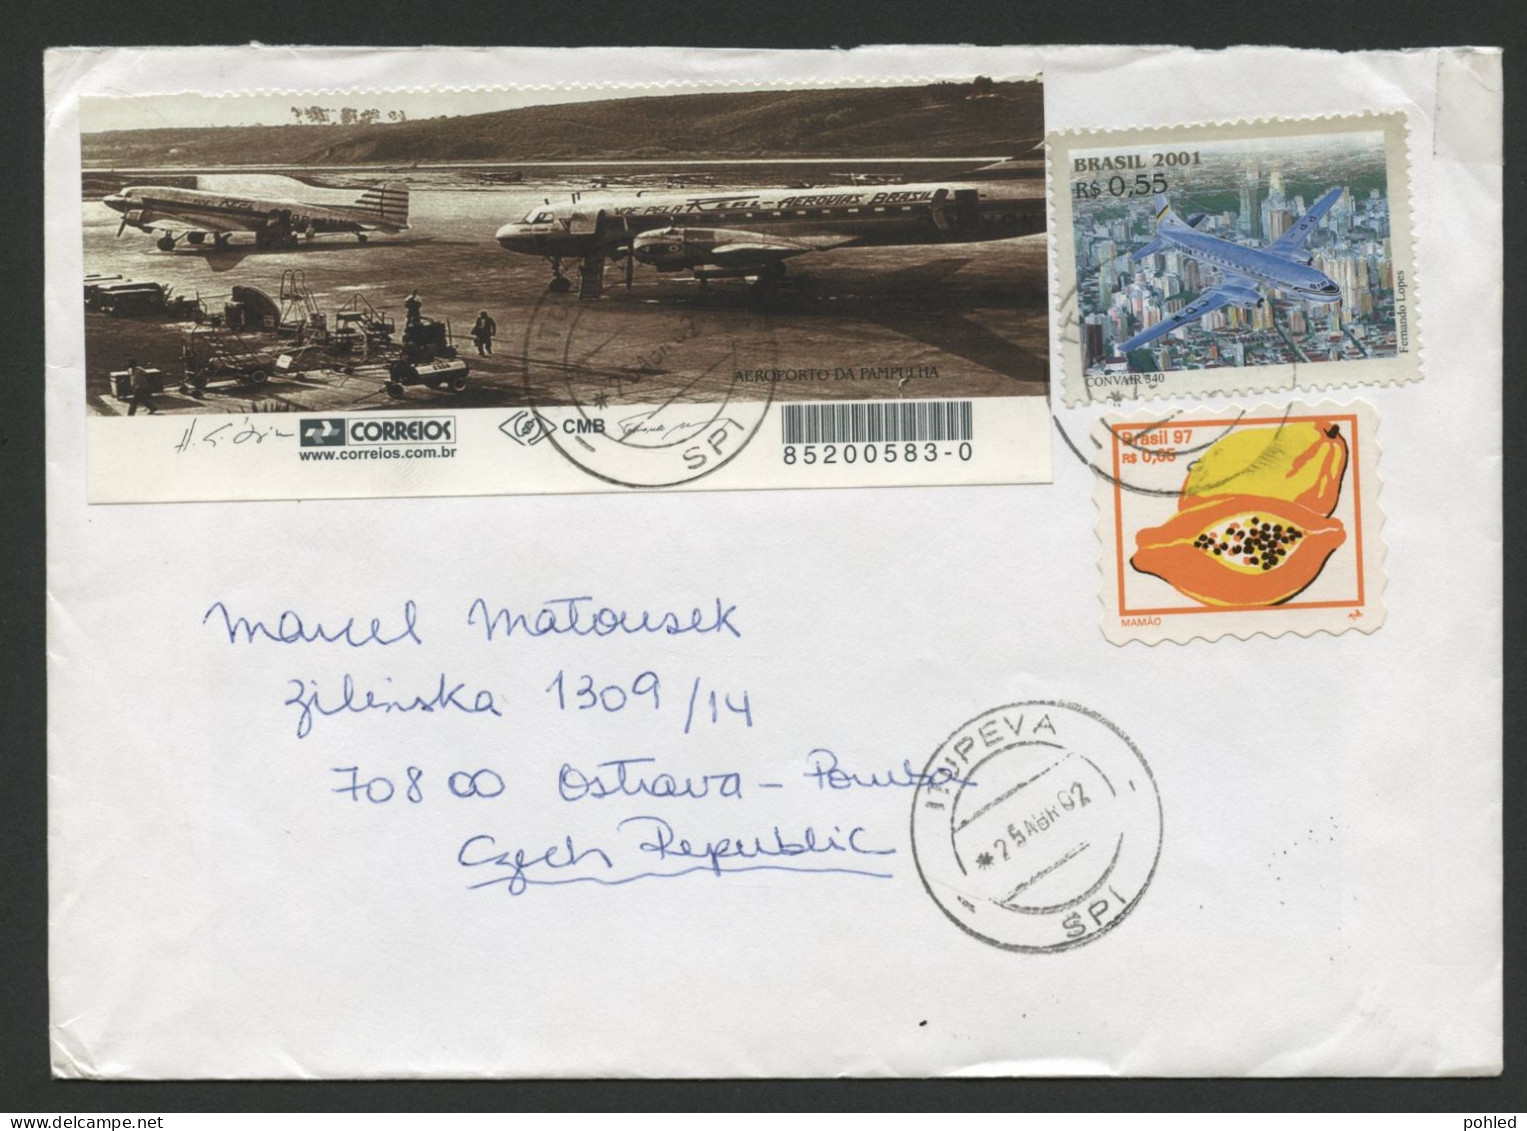 01255*BRAZIL To CZECHOSLOVAKIA*AIRMAIL COVER*2002 - Lettres & Documents